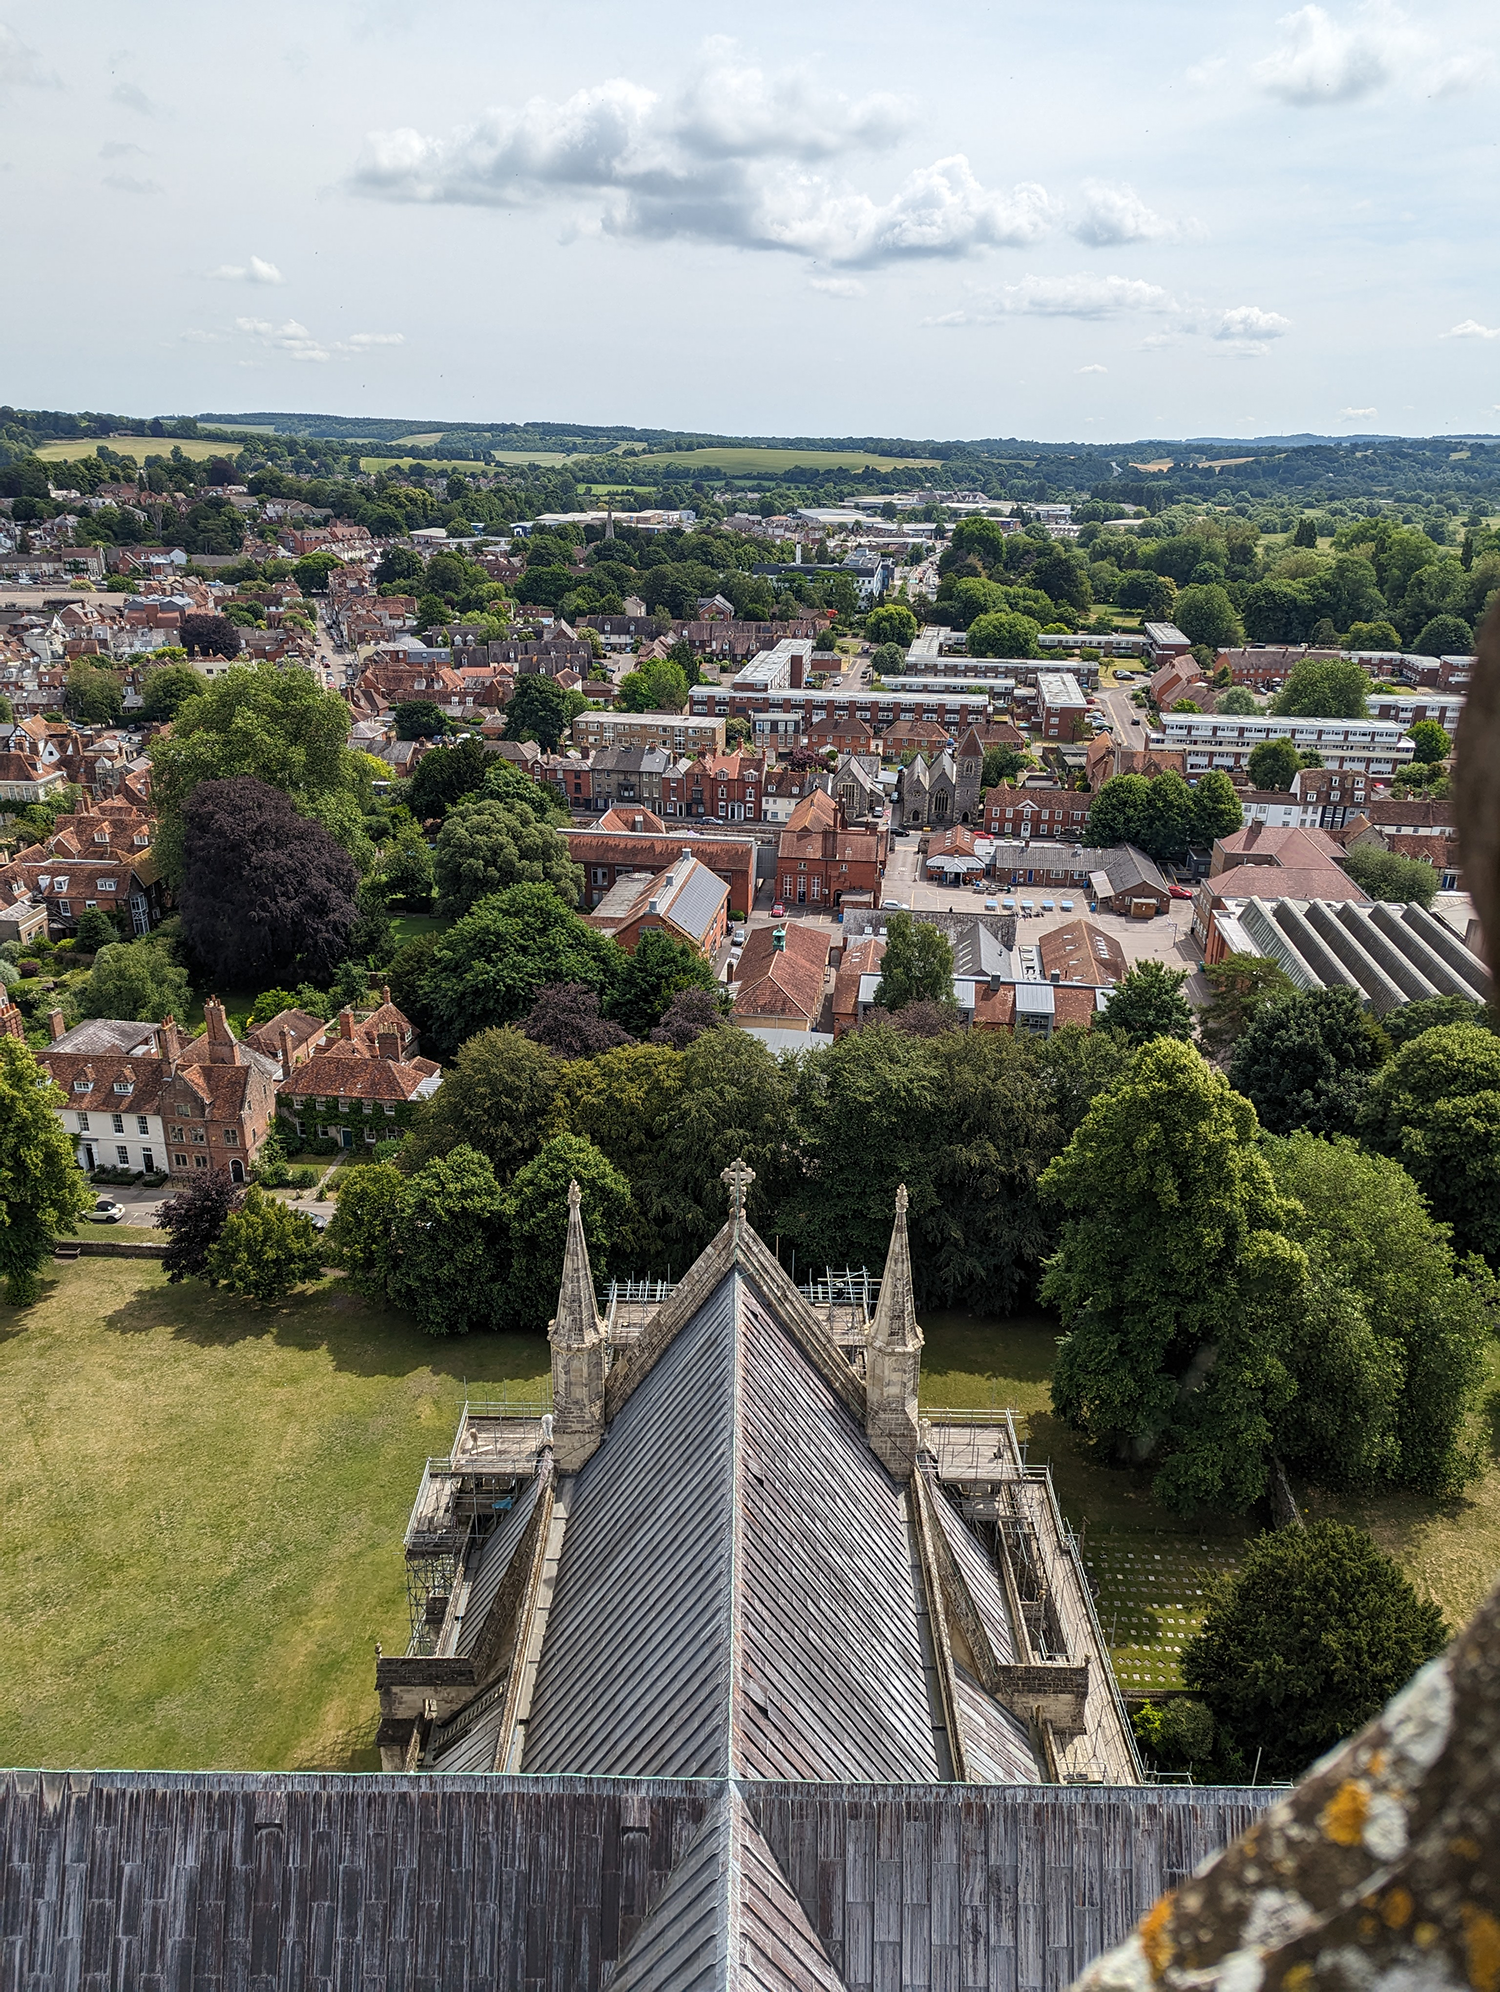 View of Salisbury from the tower balcony